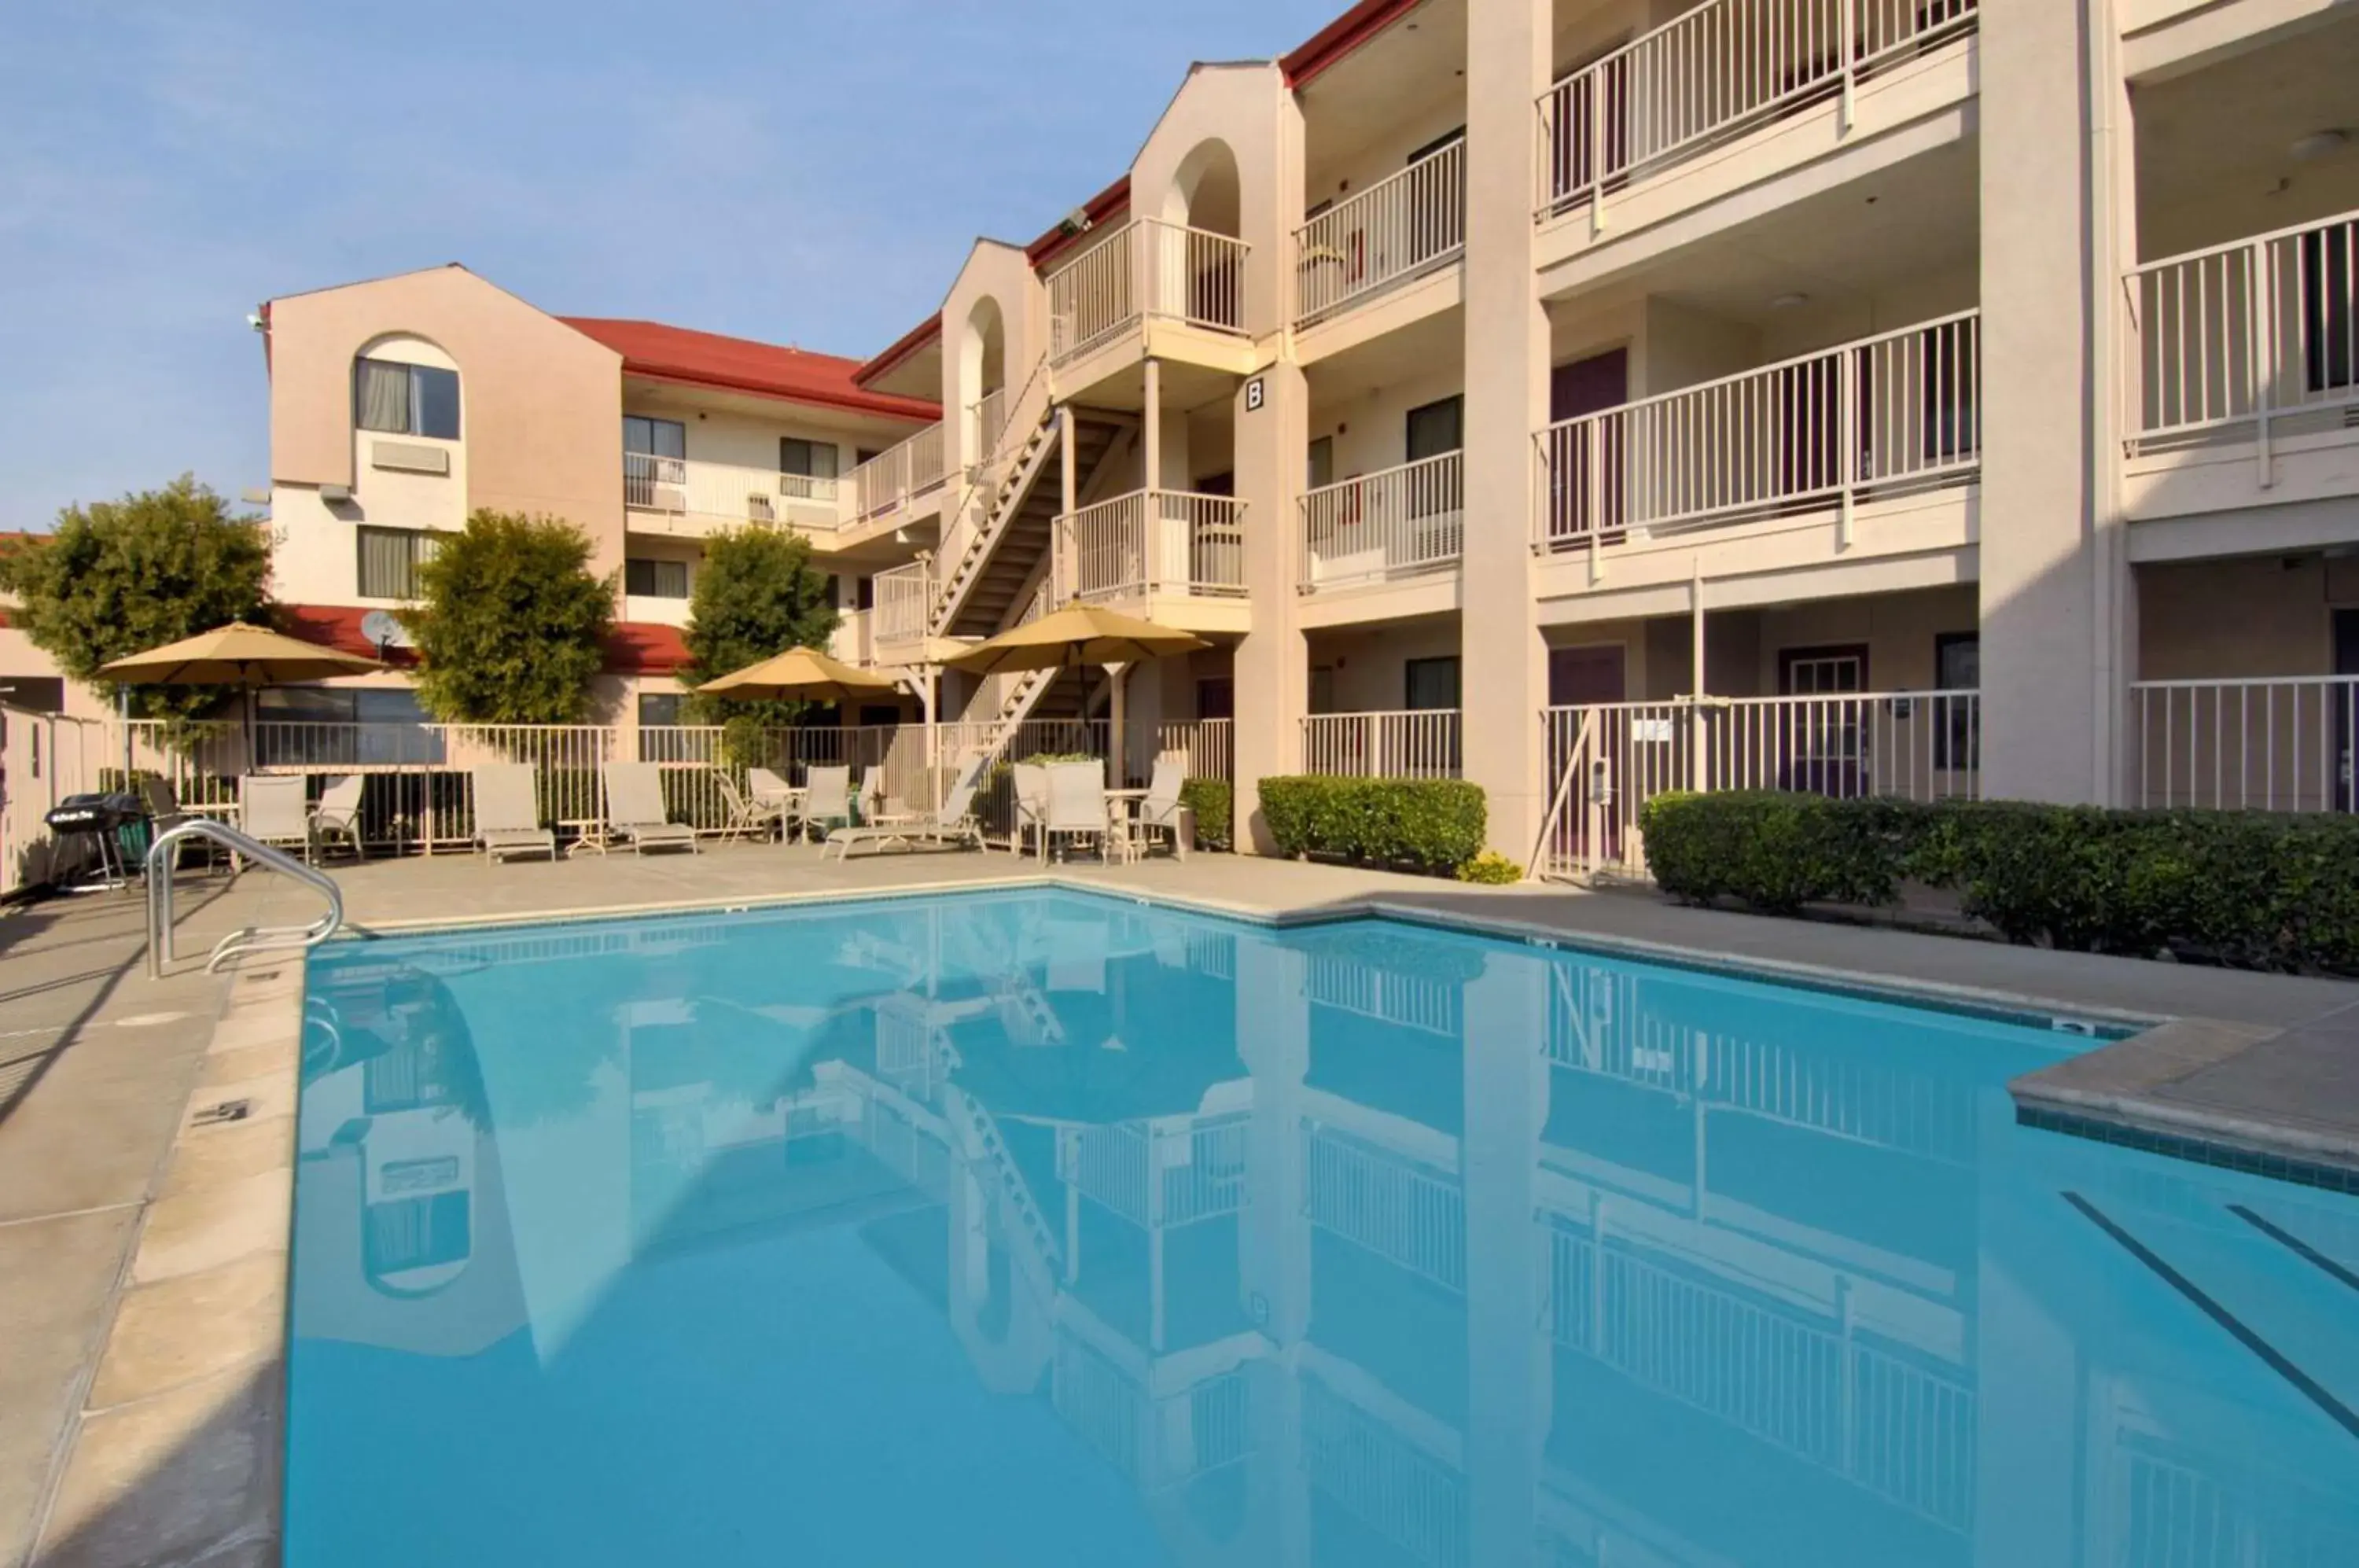 On site, Swimming Pool in California Inn and Suites, Rancho Cordova